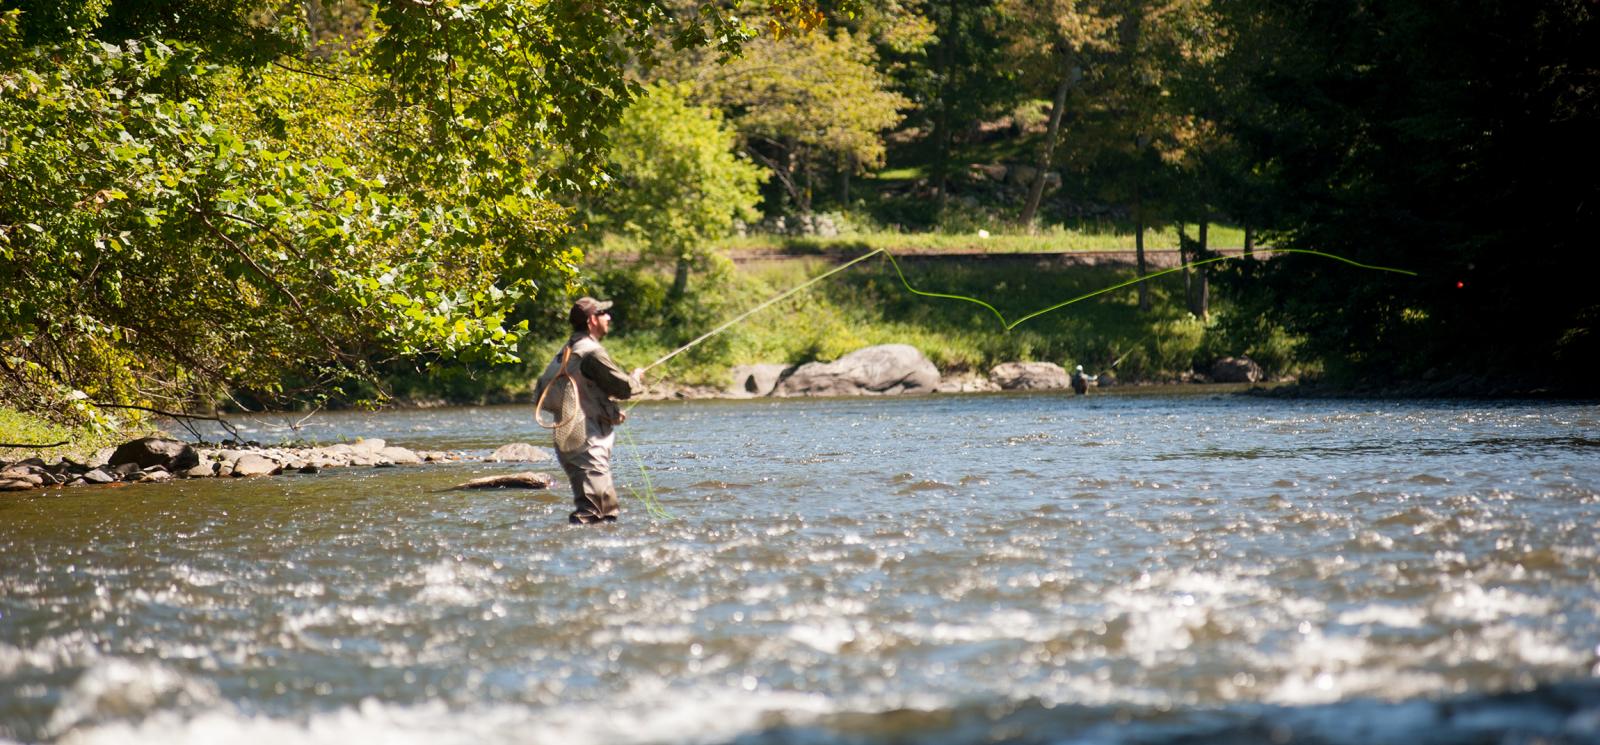 A man flyfishing in the river (CTVisit-Photoshelter)